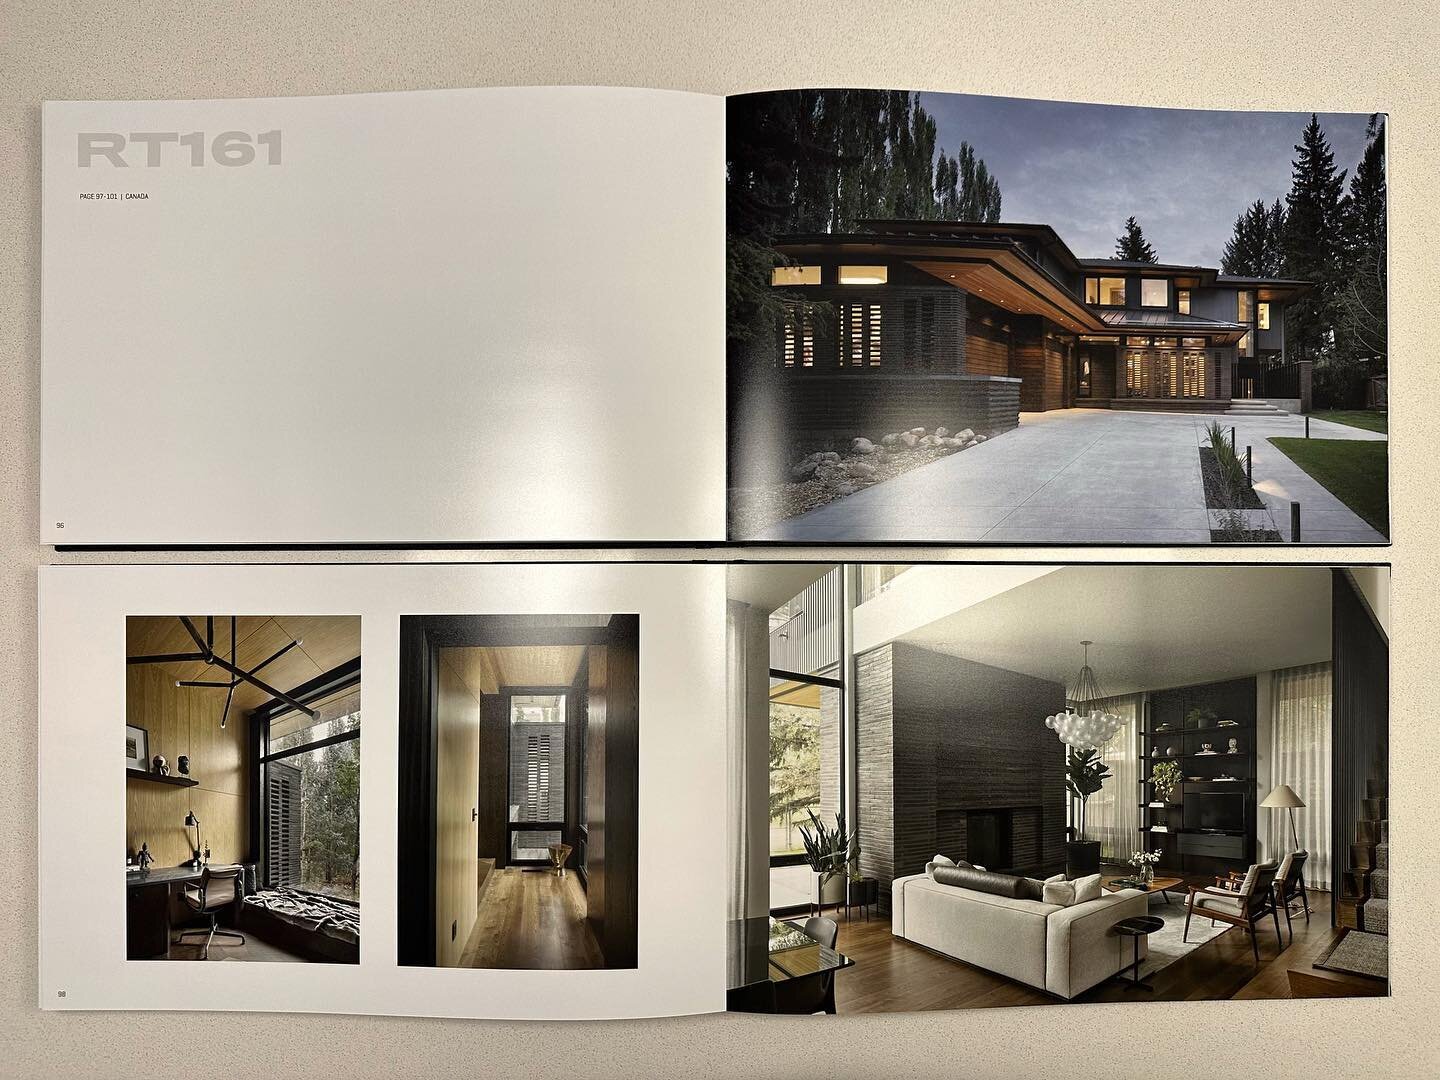 Received 2 copies the beautiful Randers Ultima project book. Happy to see one of our projects. 
Home Design: @dejongdesign 
Home Built By: @waterfordhomesyyc 
Interior Design: @shaunfordandco 
Photography: @eymeric.widling 

#dejongdesign #keelarchit